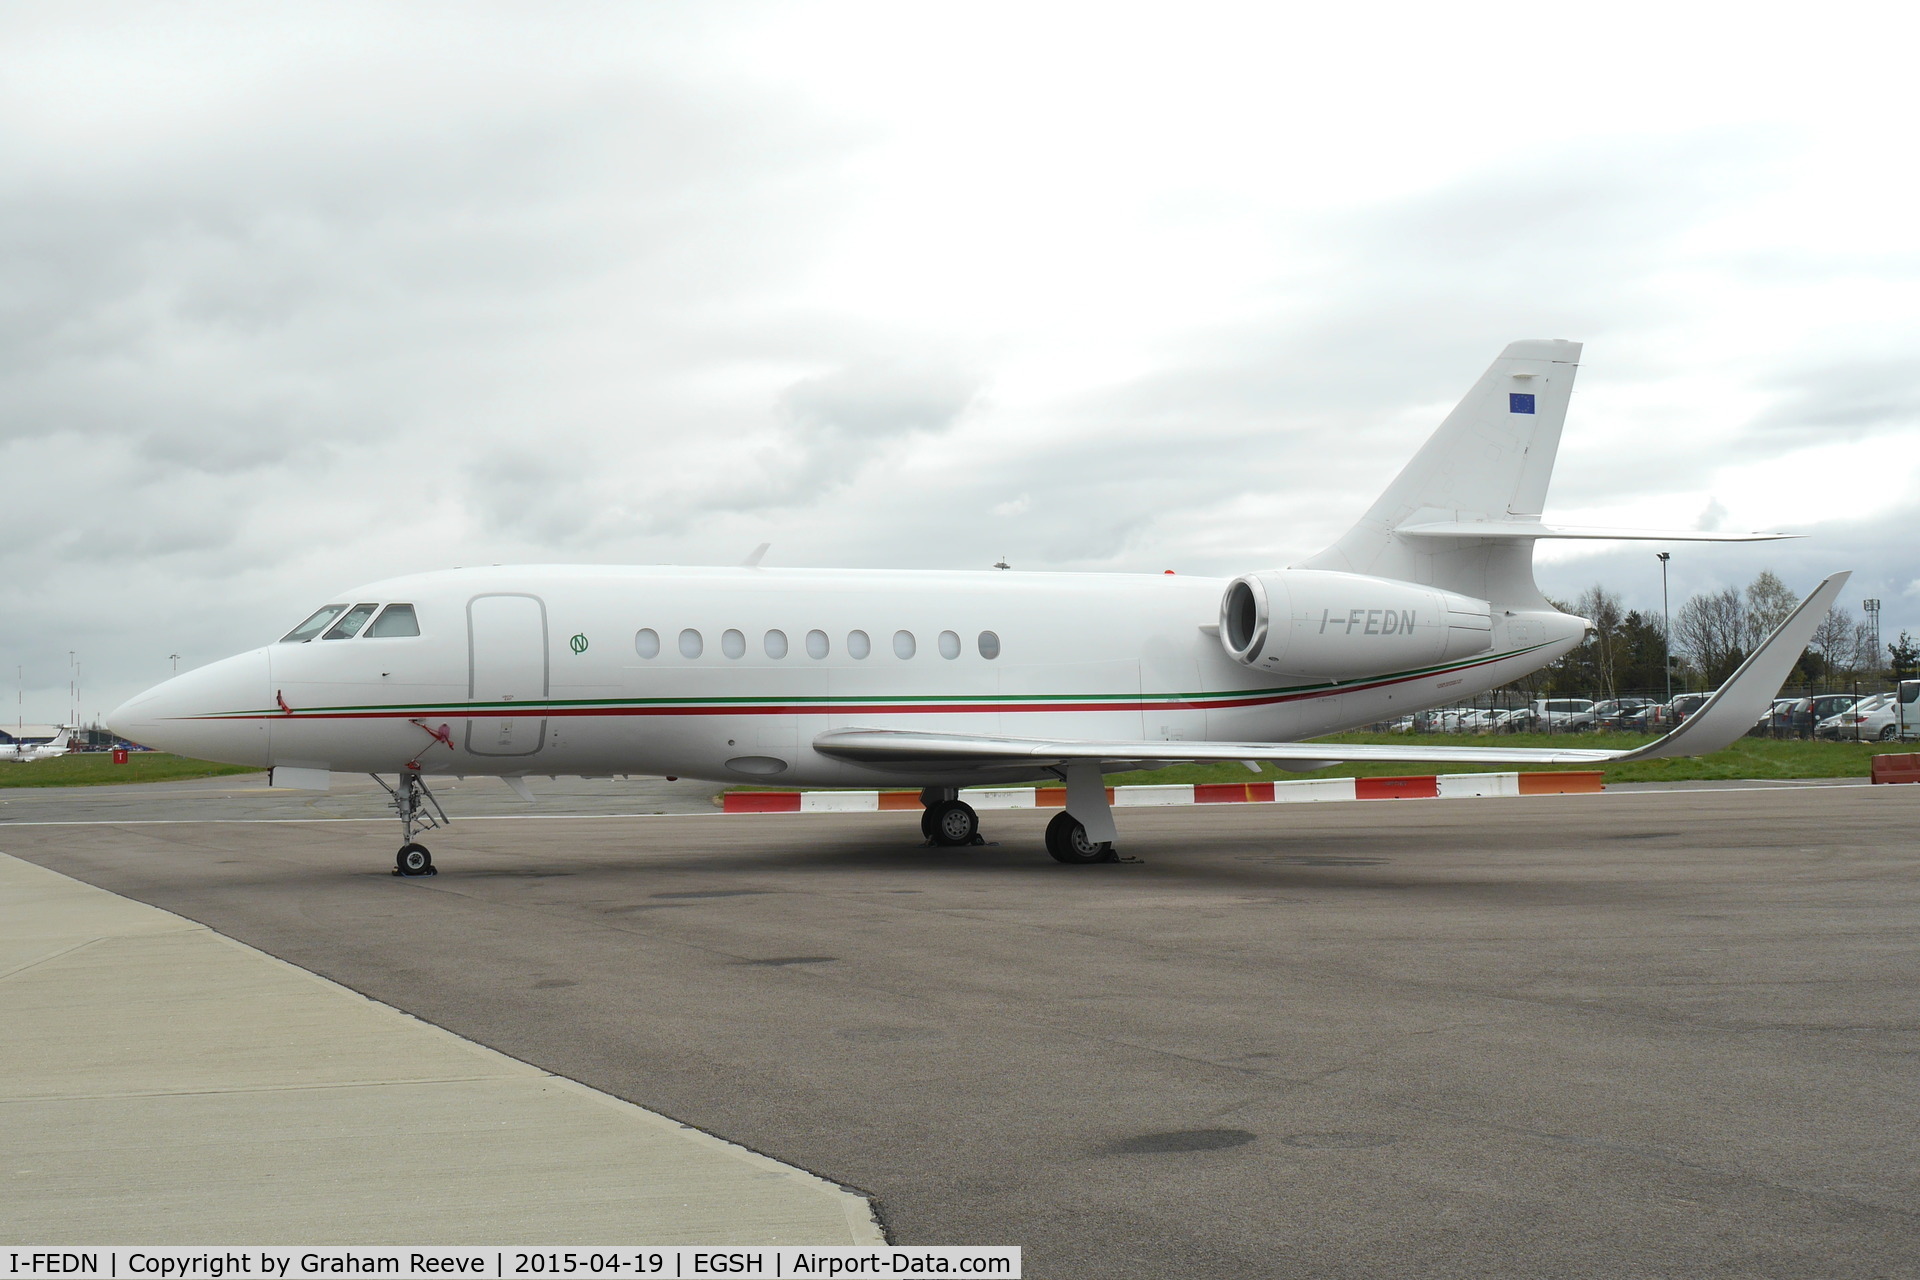 I-FEDN, 2009 Dassault Falcon 2000LX C/N 204, Parked at Norwich.